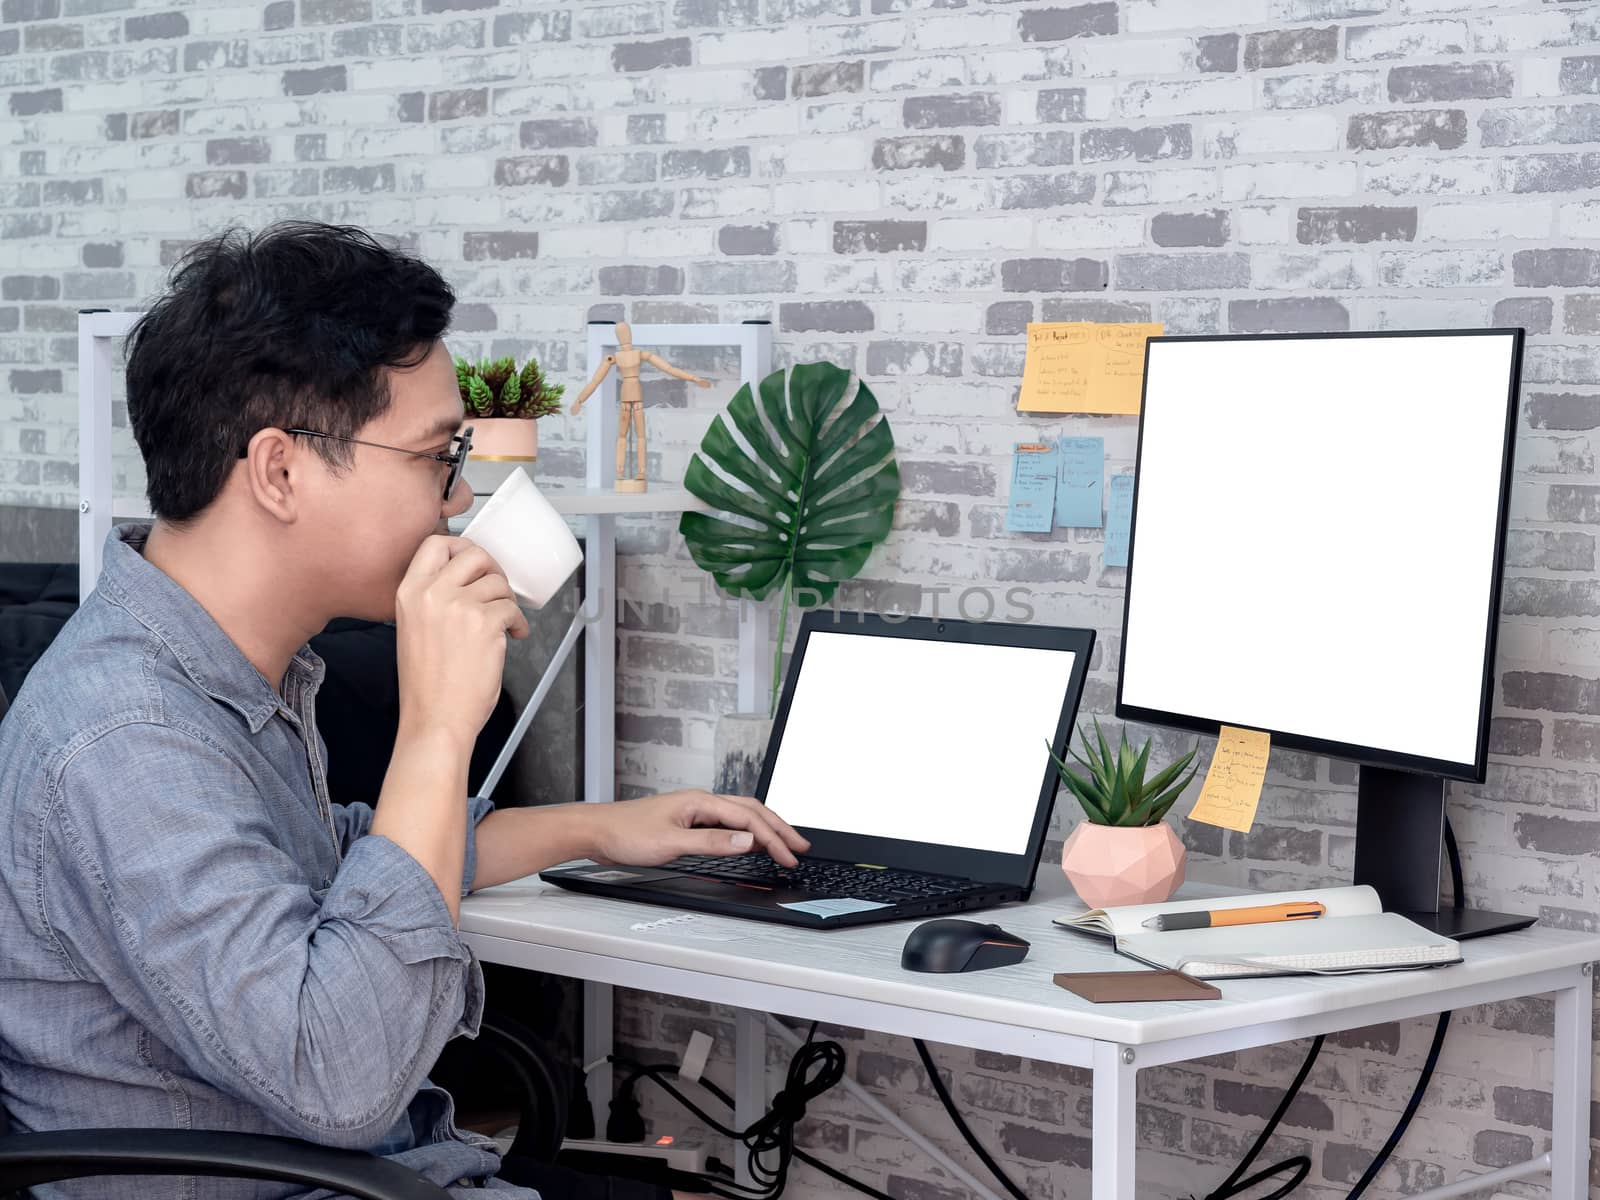 Asian man drinking coffee and working with laptop computer with white blank screen and watching another monitor in his room, condominium. Work at home and business online concept.